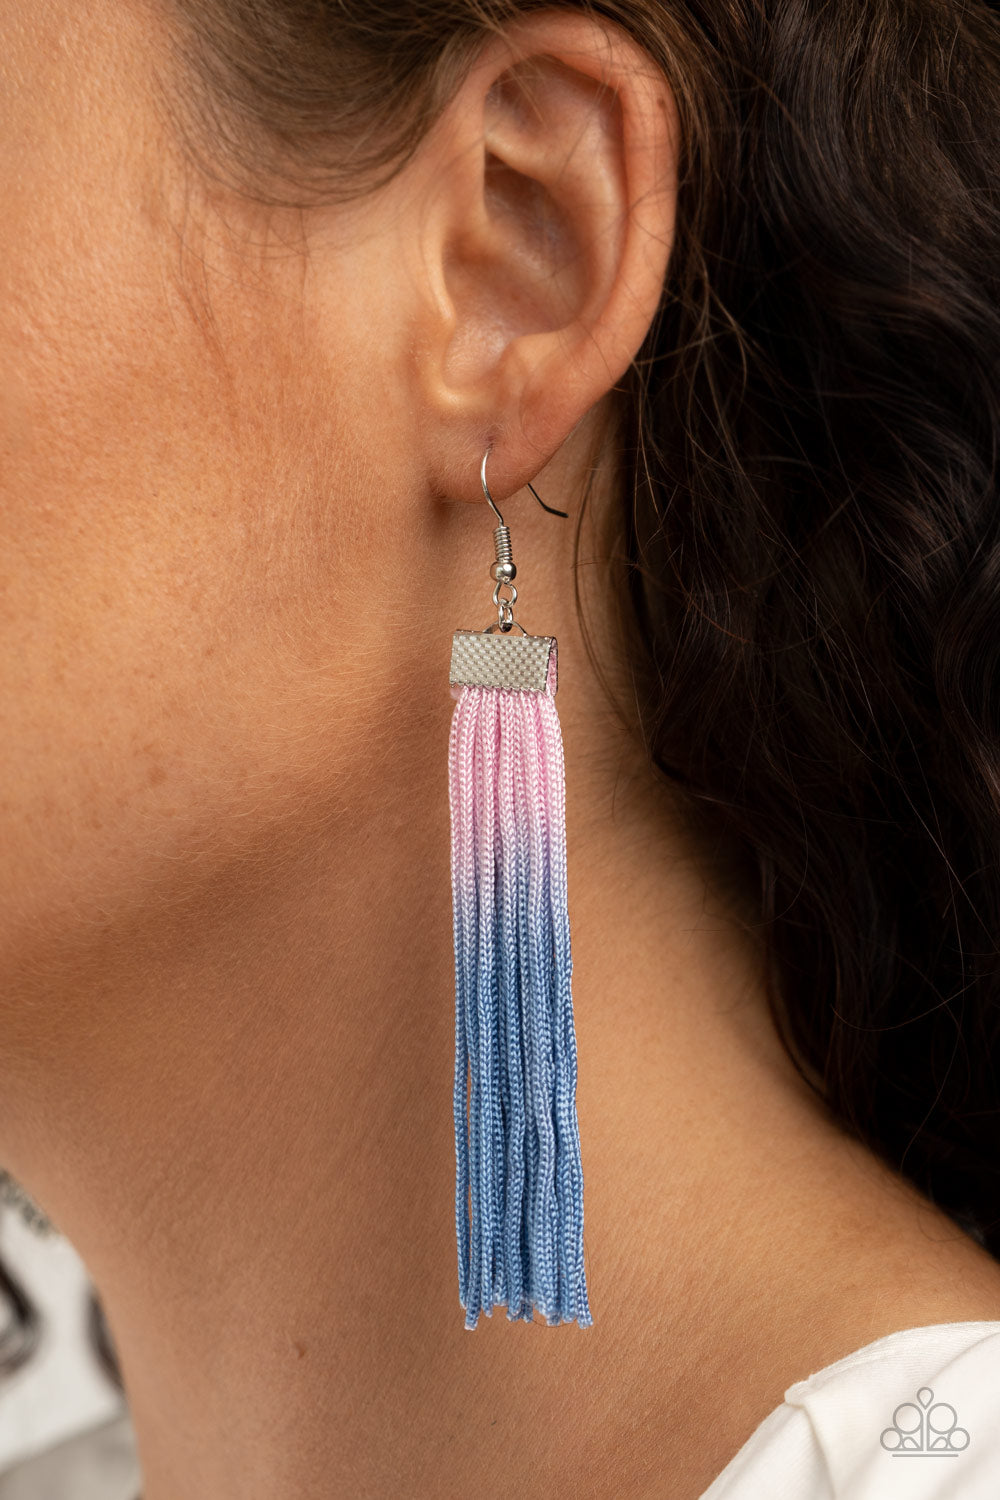 Paparazzi Jewelry & Accessories - Dual Immersion - Pink Earrings. Bling By Titia Boutique